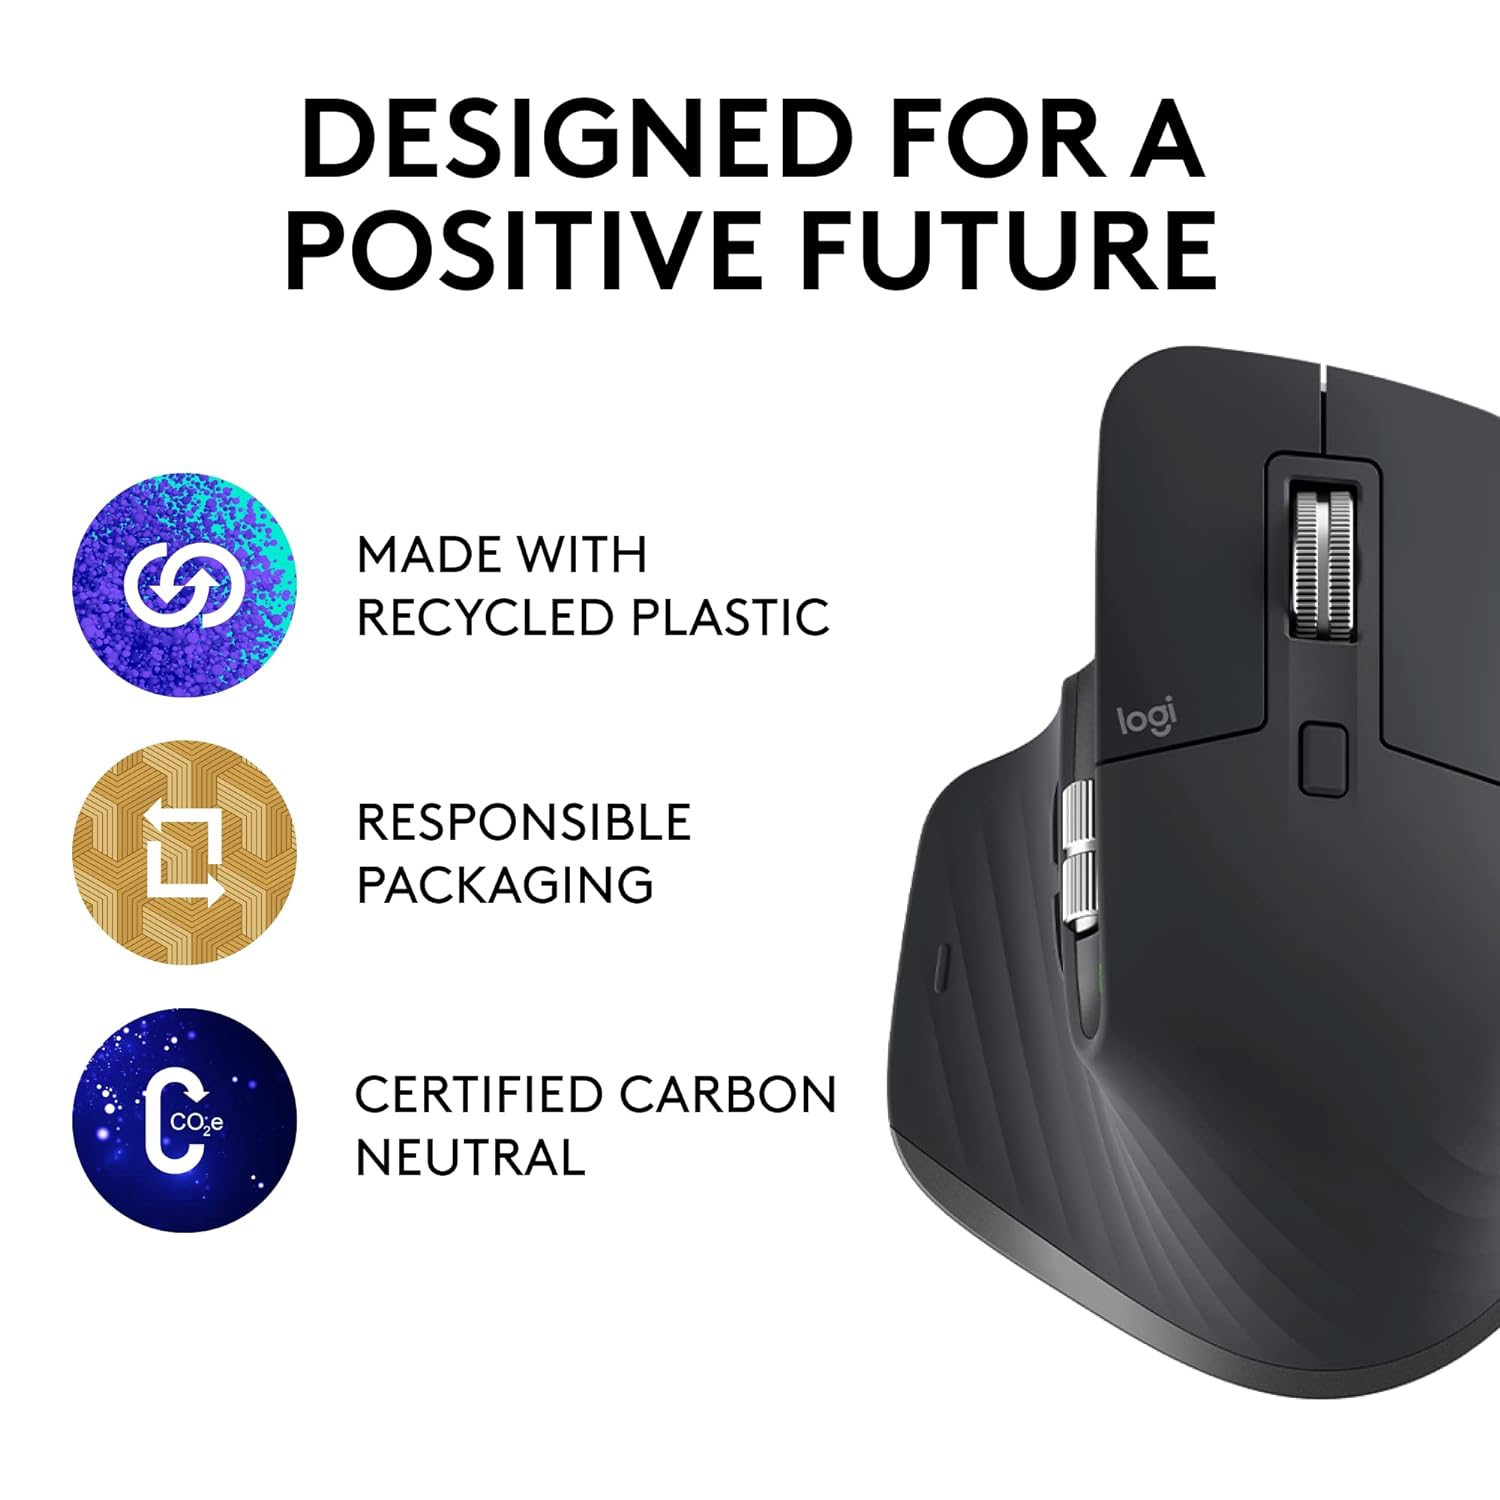 (Open Box) Logitech MX Master 3S - Wireless Performance Mouse with Ultra-Fast Scrolling, Ergo, 8K DPI, Track on Glass, Quiet Clicks, USB-C, Bluetooth, Windows, Linux, Chrome-Graphite (Grade - A+)